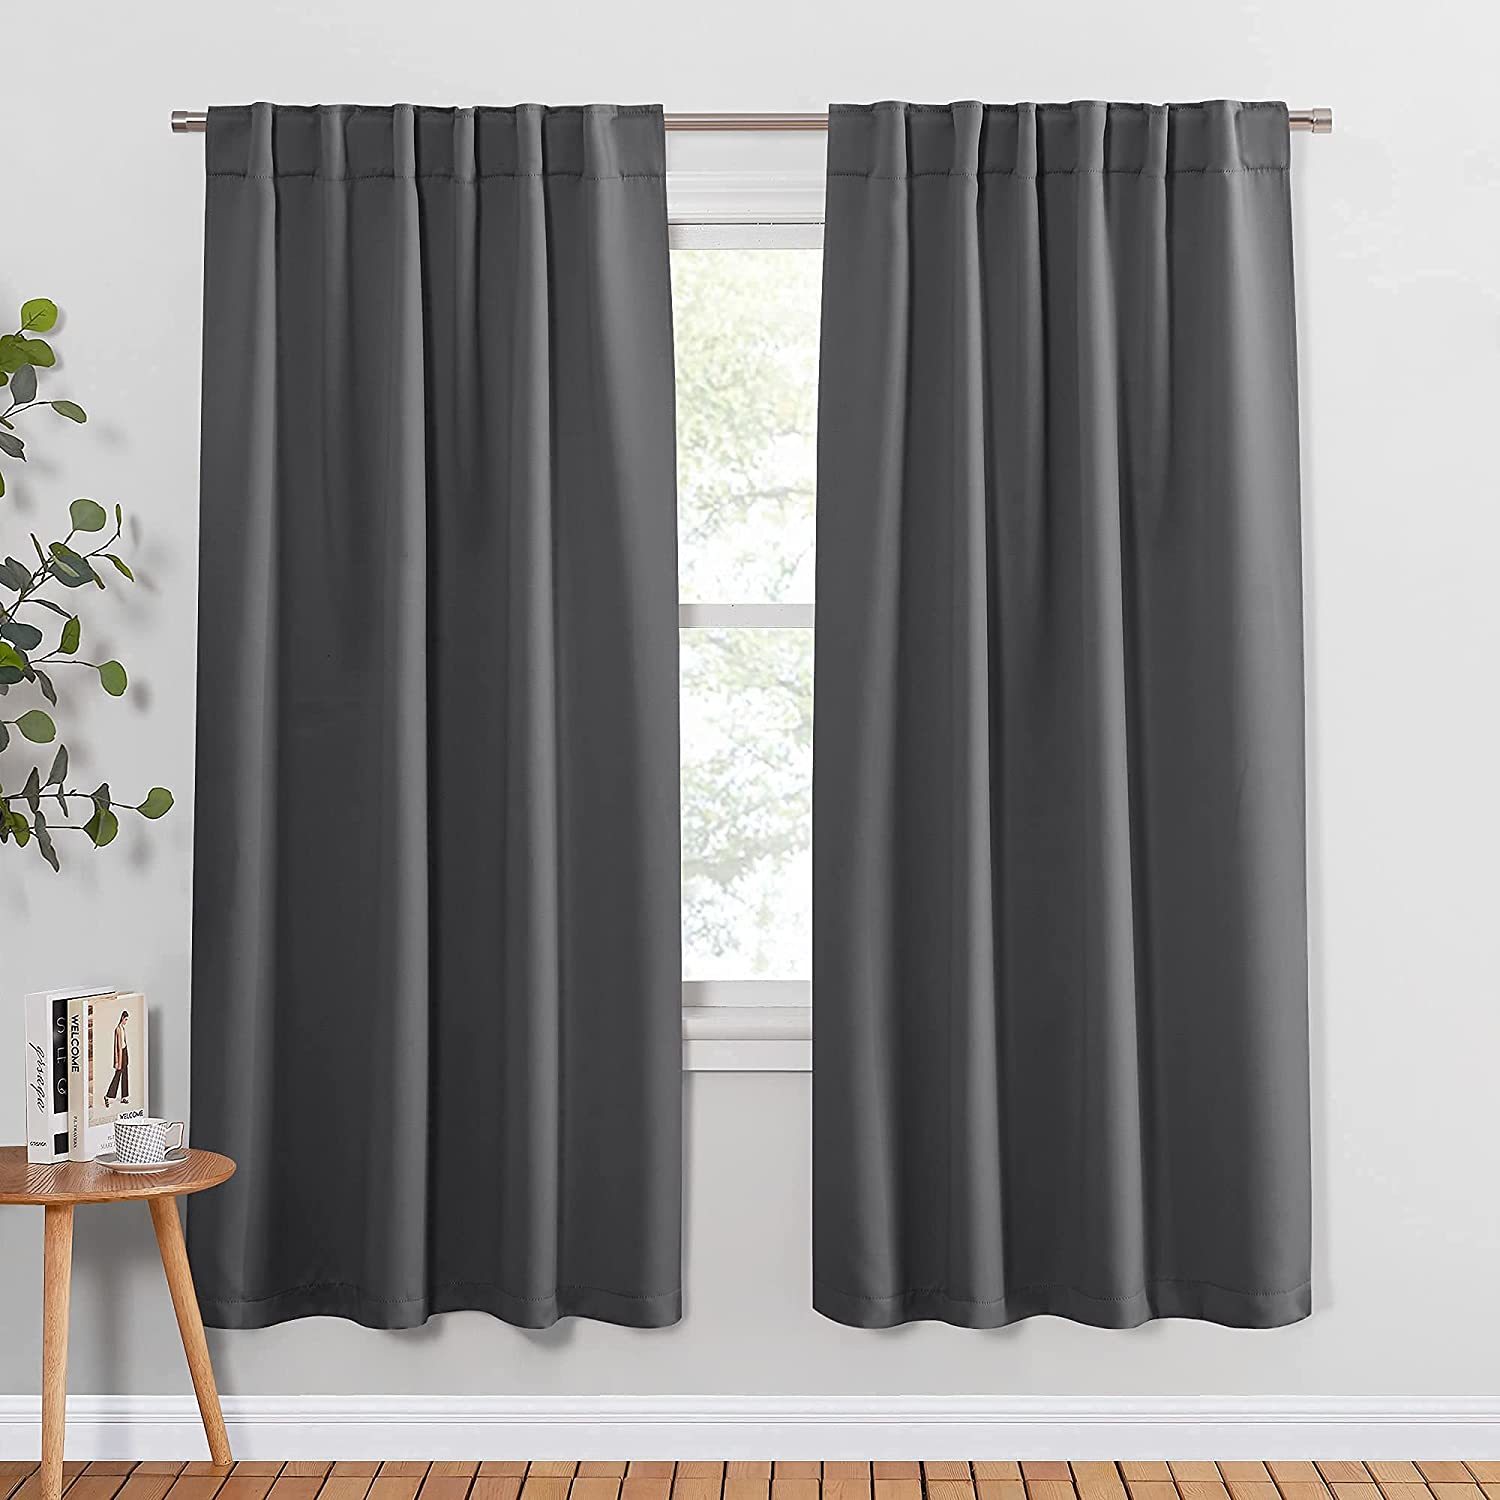 Pony Dance Blackout Curtains For Bedroom - 72 Inches Length Thermal, 2 Pieces - $35.99